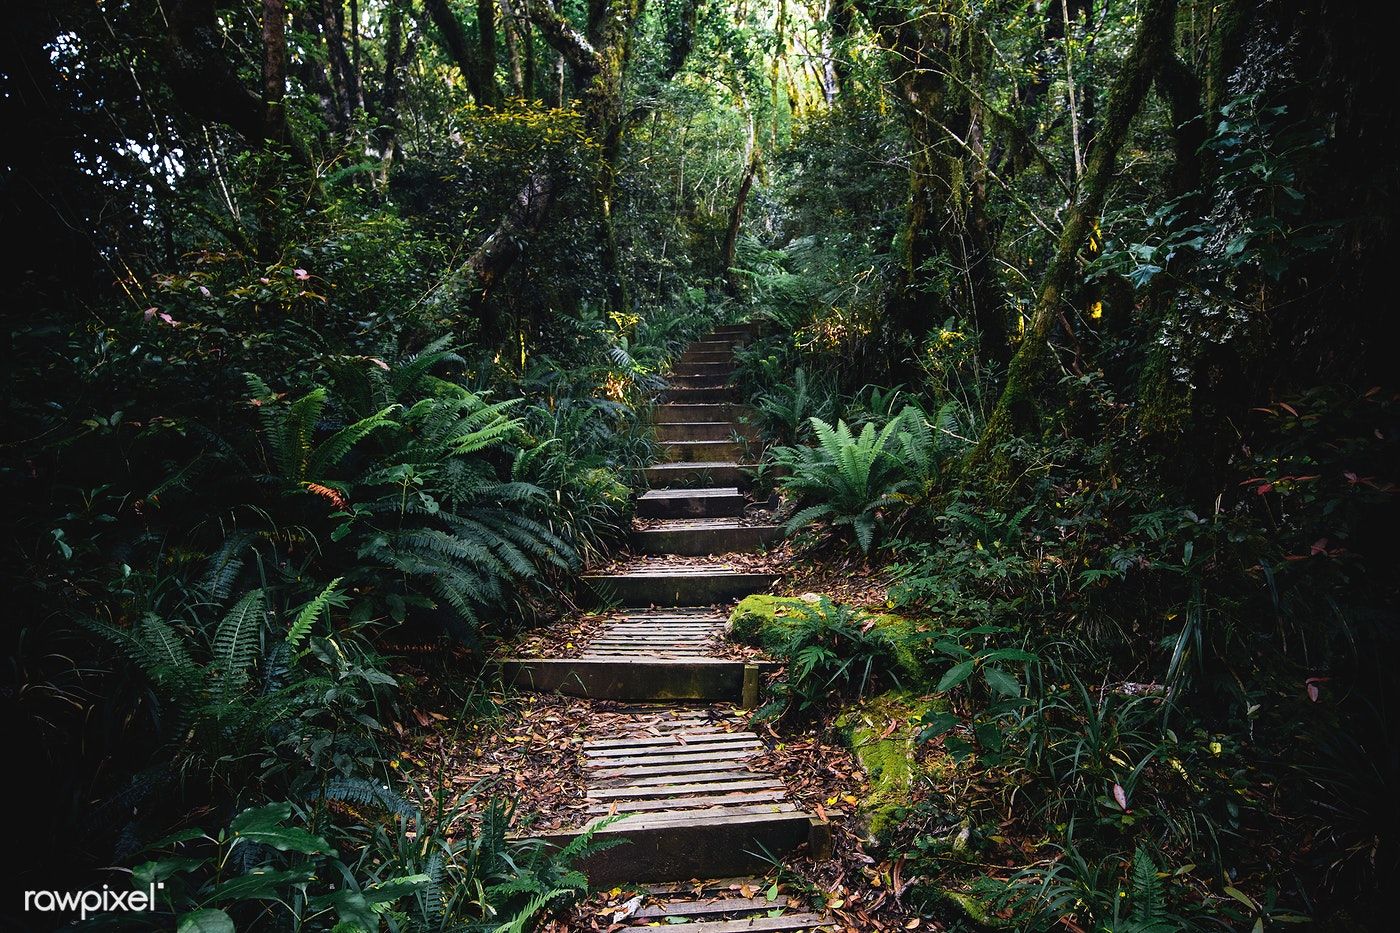 Premium Image Of Pathway In A Tropical Jungle